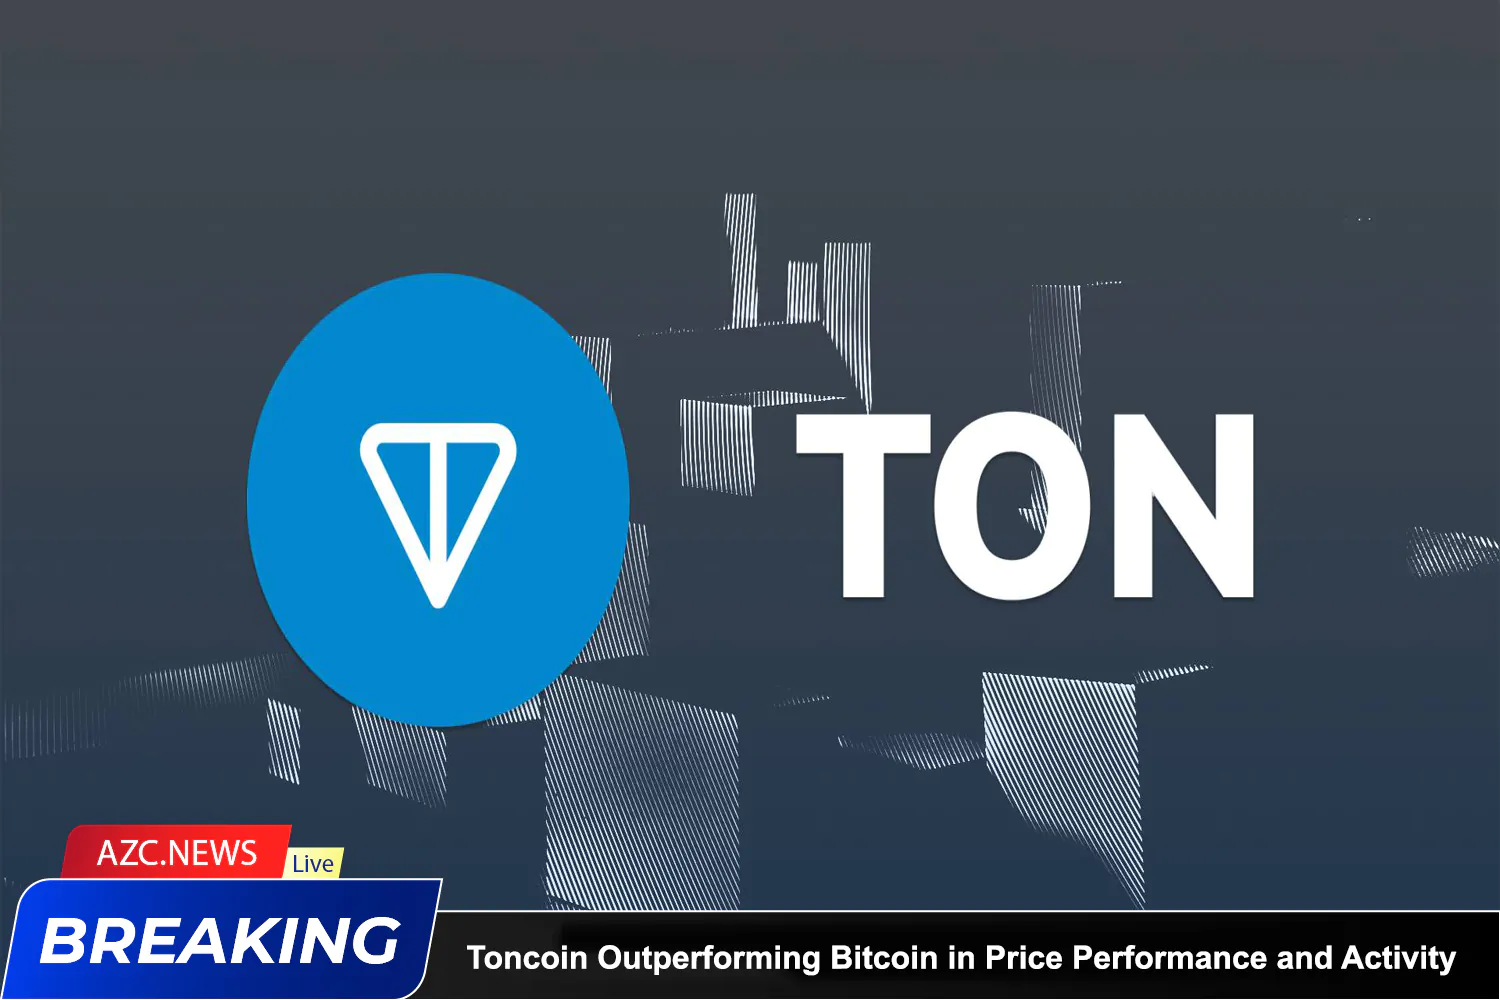 Azcnews Toncoin Outperforming Bitcoin In Price Performance And Activity